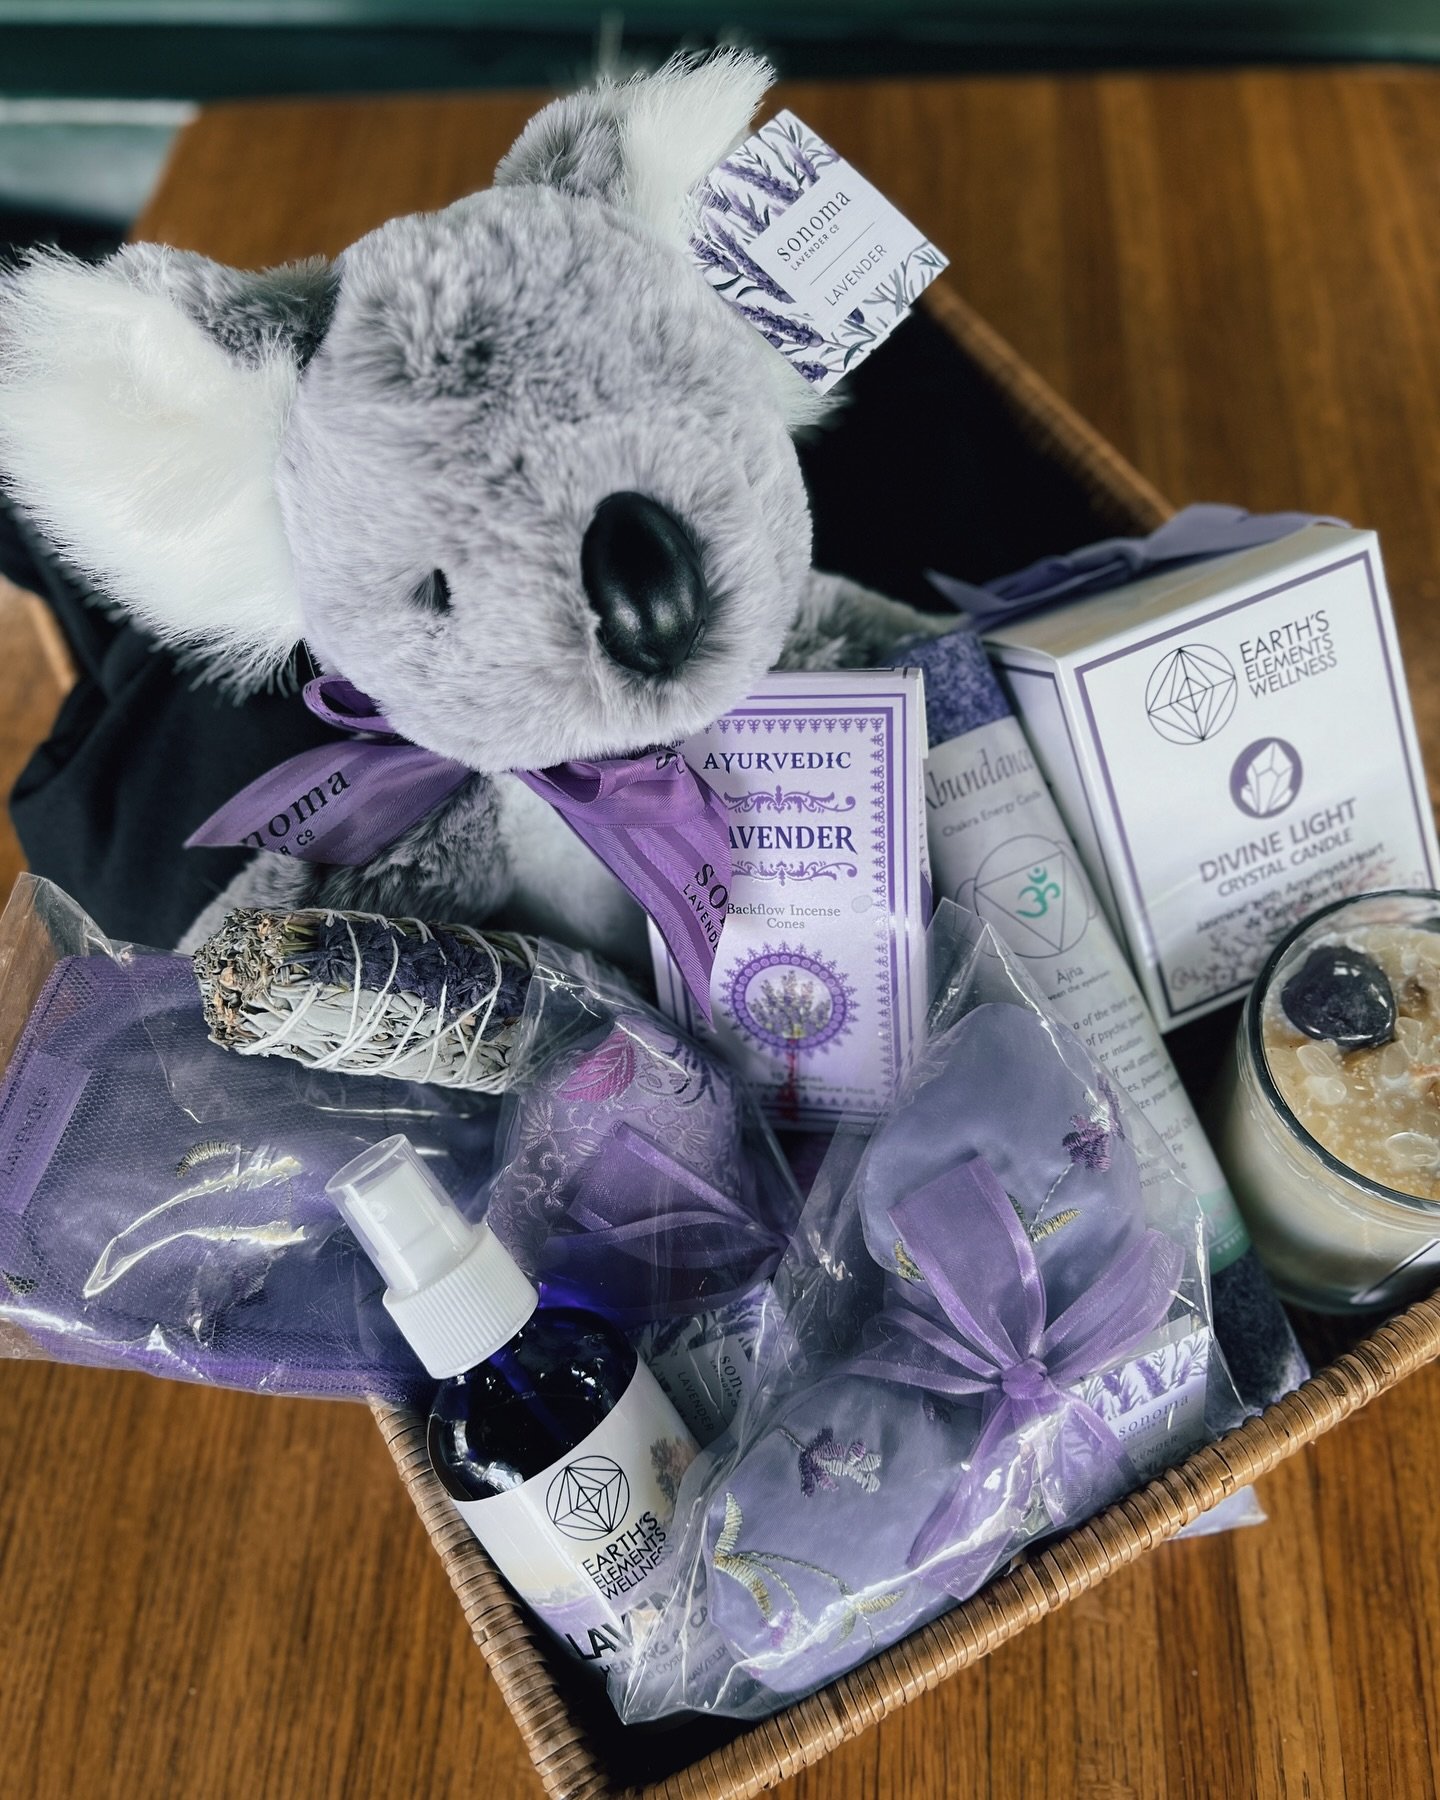 Mother&rsquo;s Day is this Sunday! 💐 Here&rsquo;s another gift idea for the moms in your life ☺️

Give the gift of relaxation with @sonomalavender products 🪻 These #lavender scented body wraps, eye masks, and warmies can help relieve stress, promot